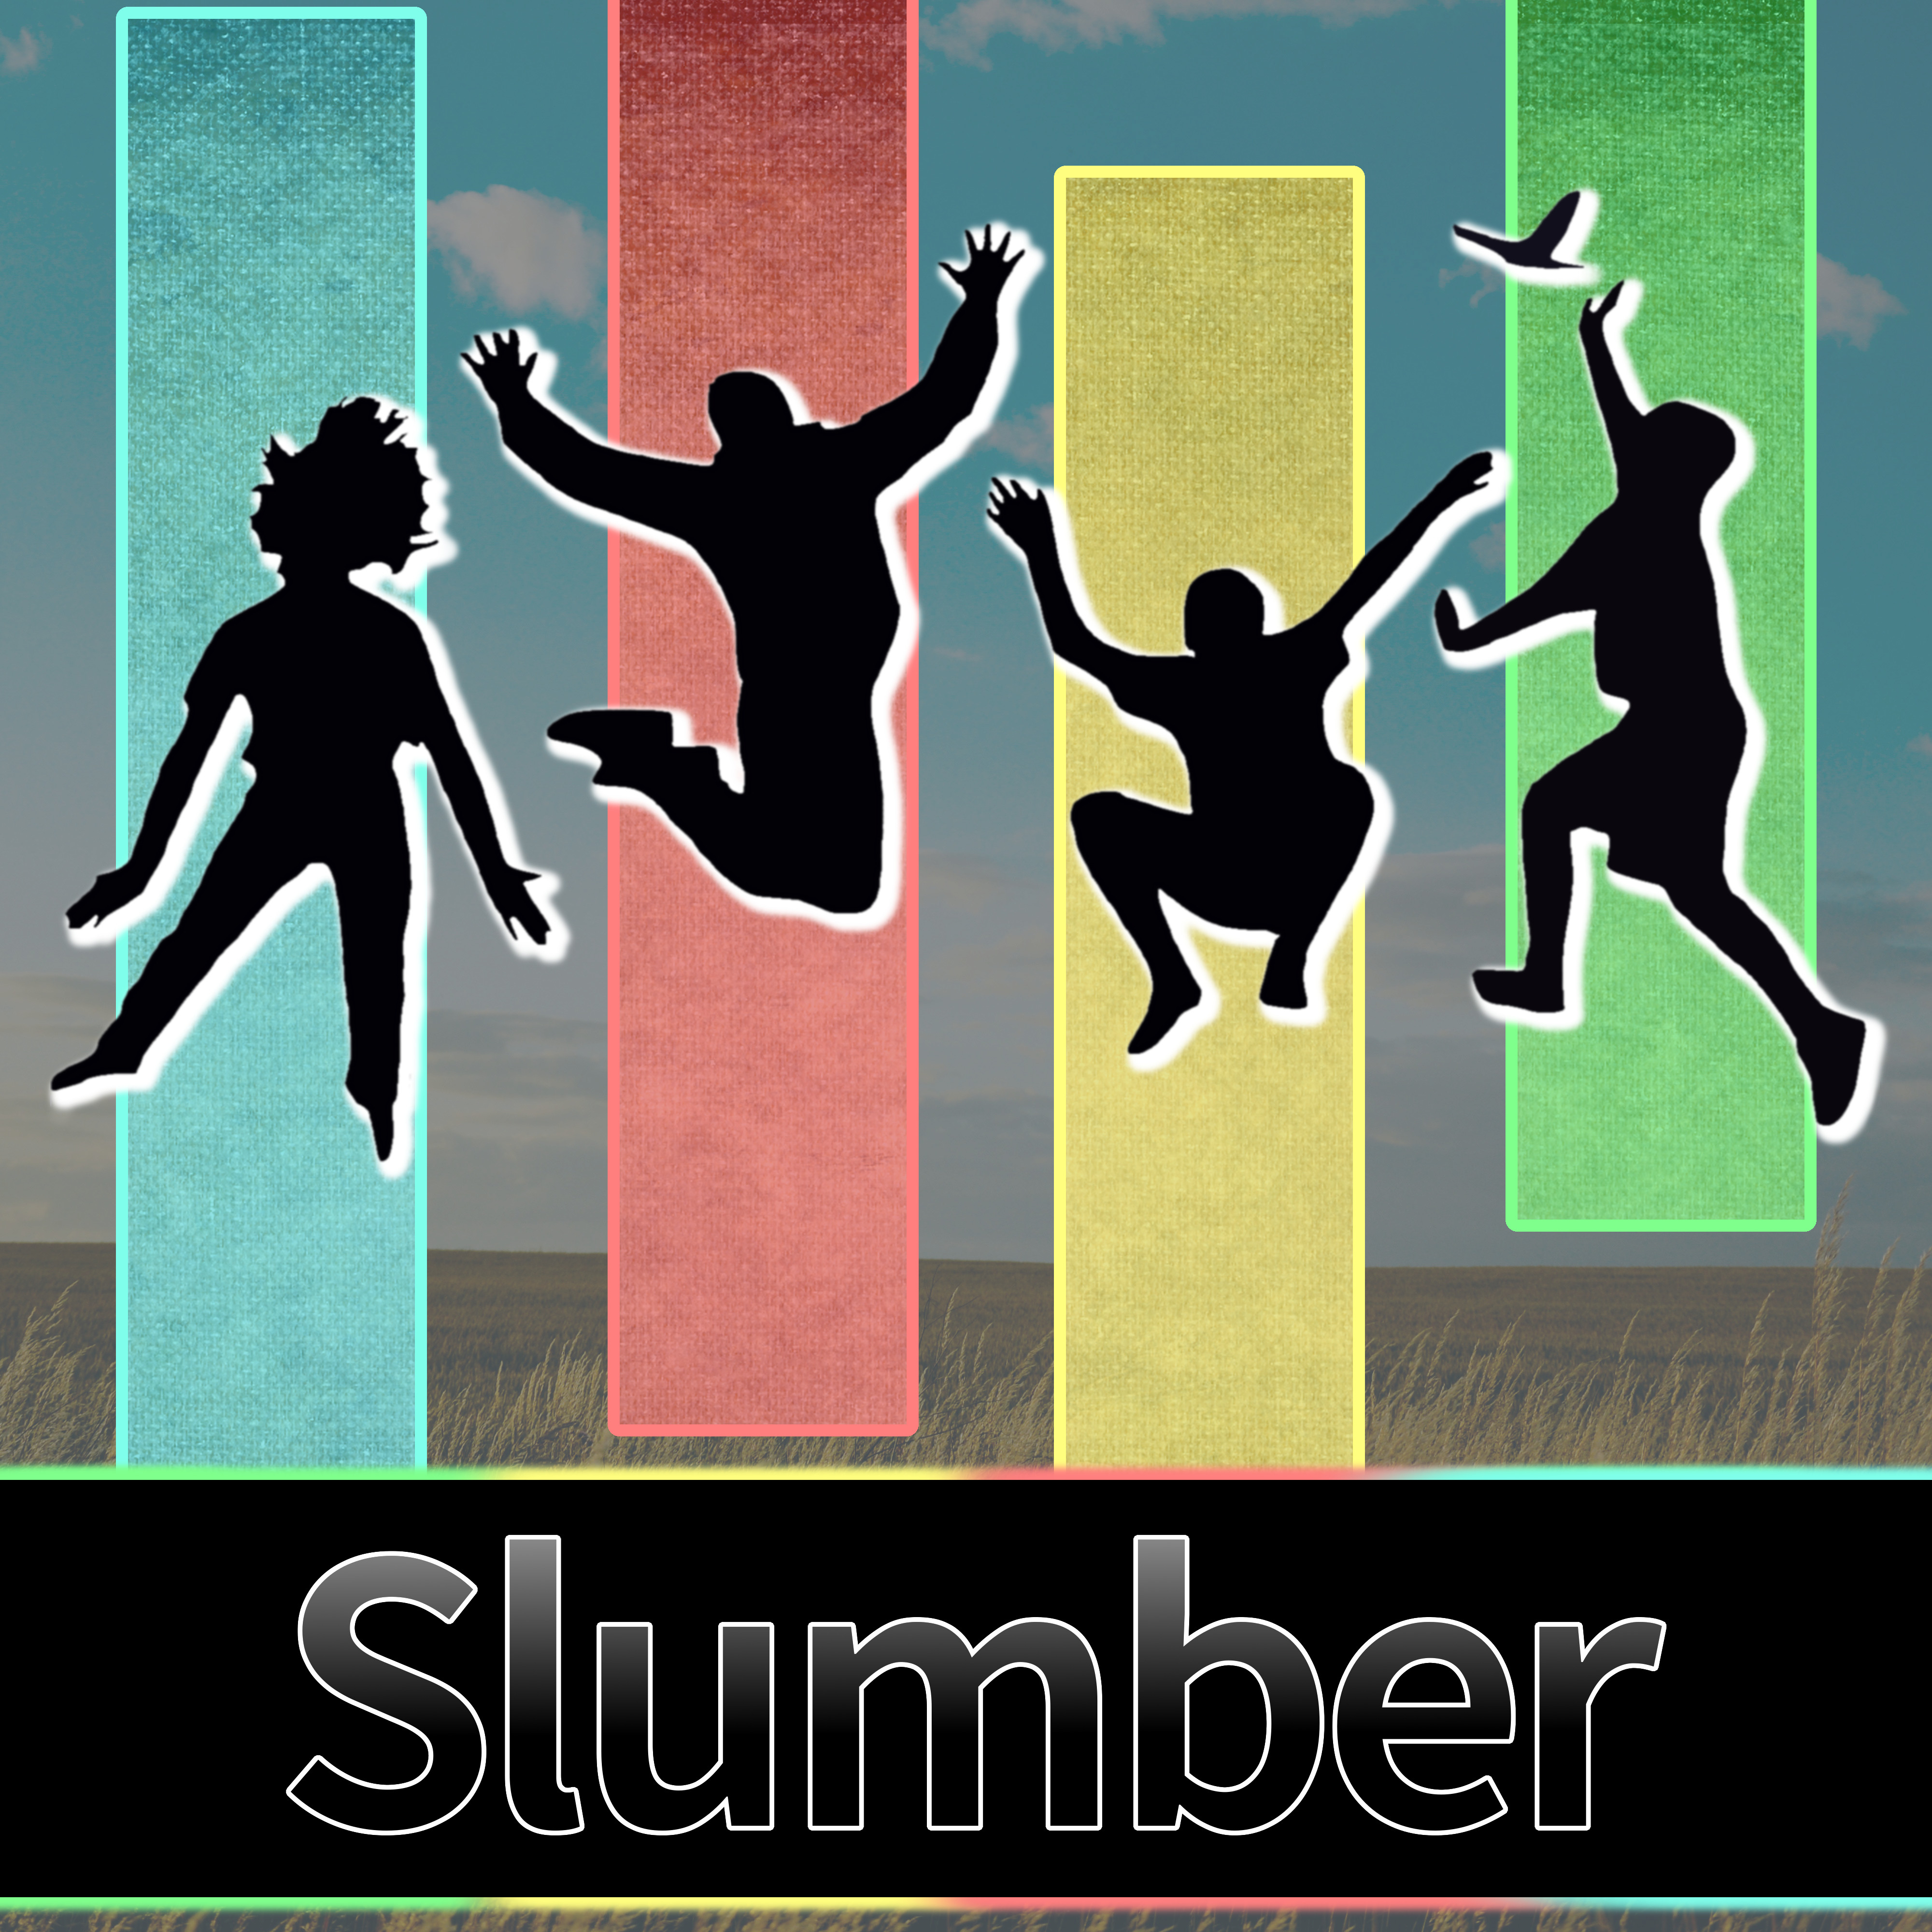 Slumber - Sleep Healthy and Improve Your Life Quality, White Noises for Sleeping Therapy, Healing Sounds of Nature for Deep Sleep, Relax and Fall Asleep Easily, Ocean and Rain Sounds for Ralexation